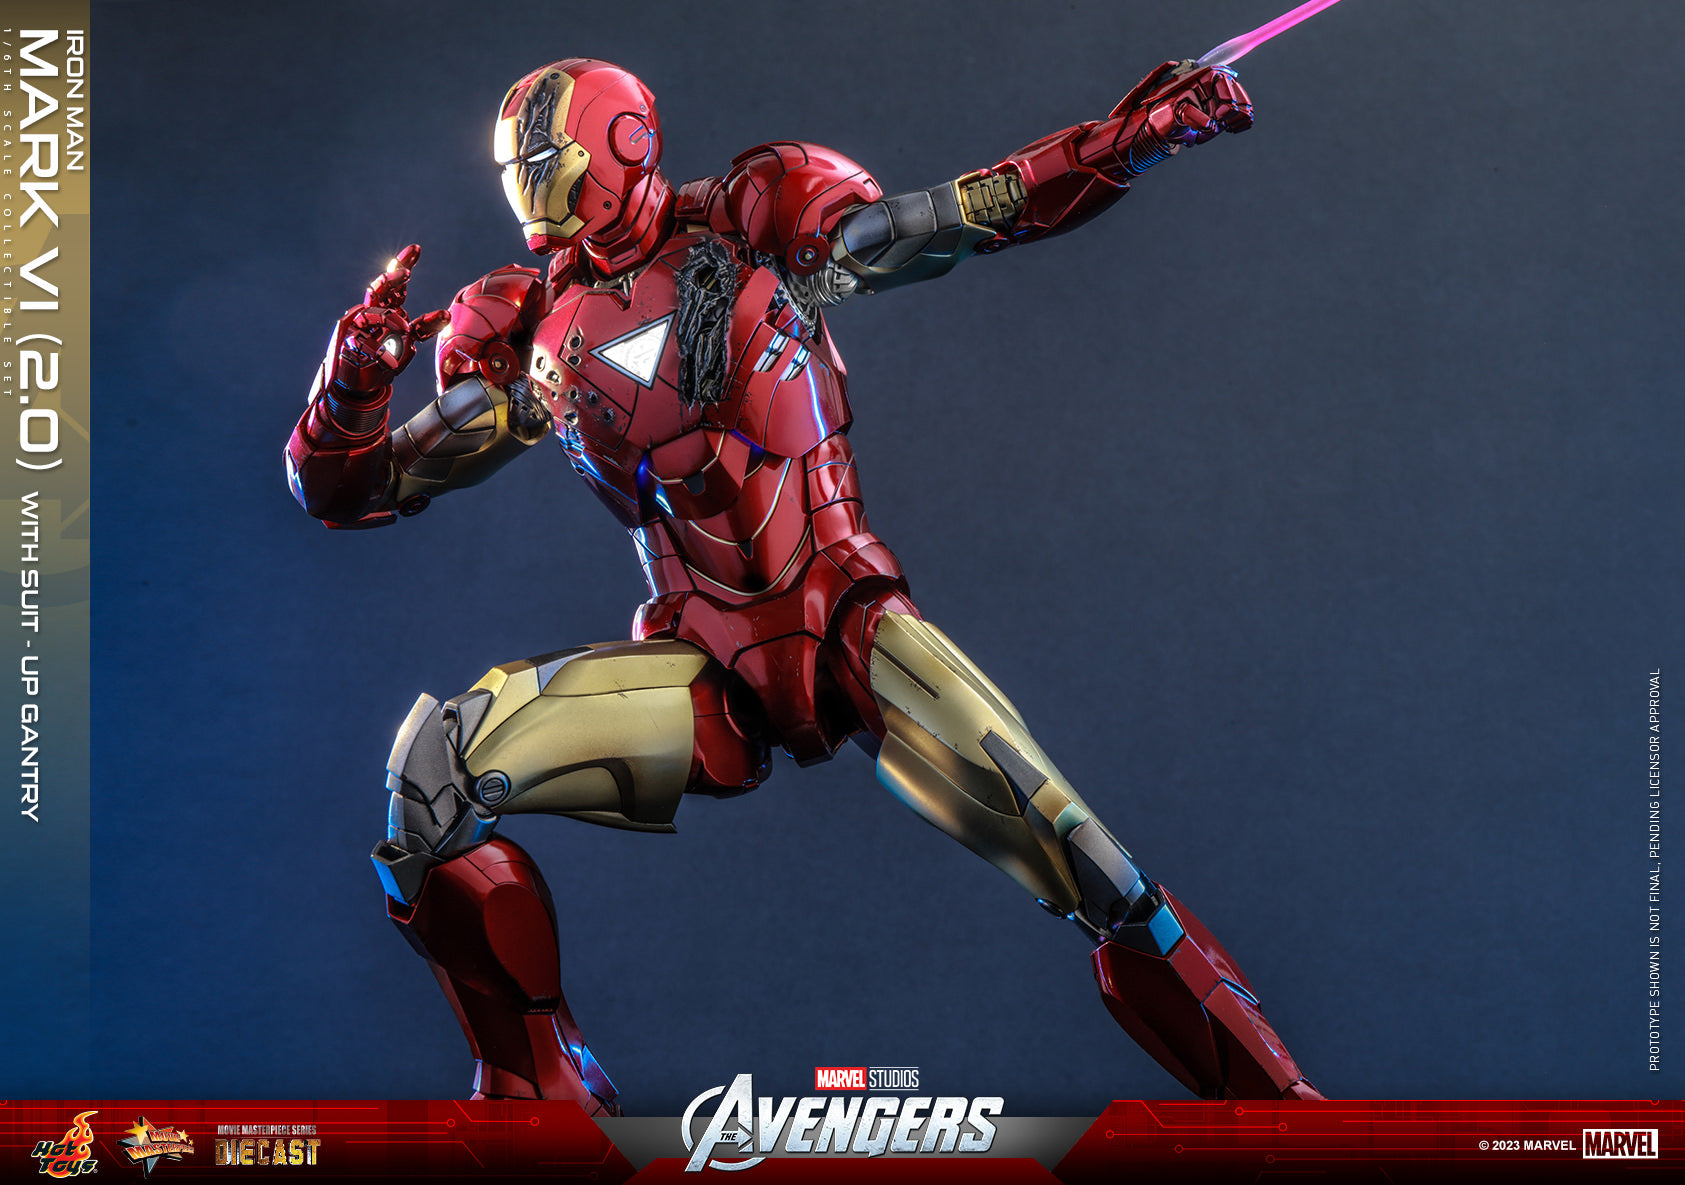 Iron Man: Mark VI (2.0): With Suit Up Gantry: Marvel: MMS688D53-Hot Toys